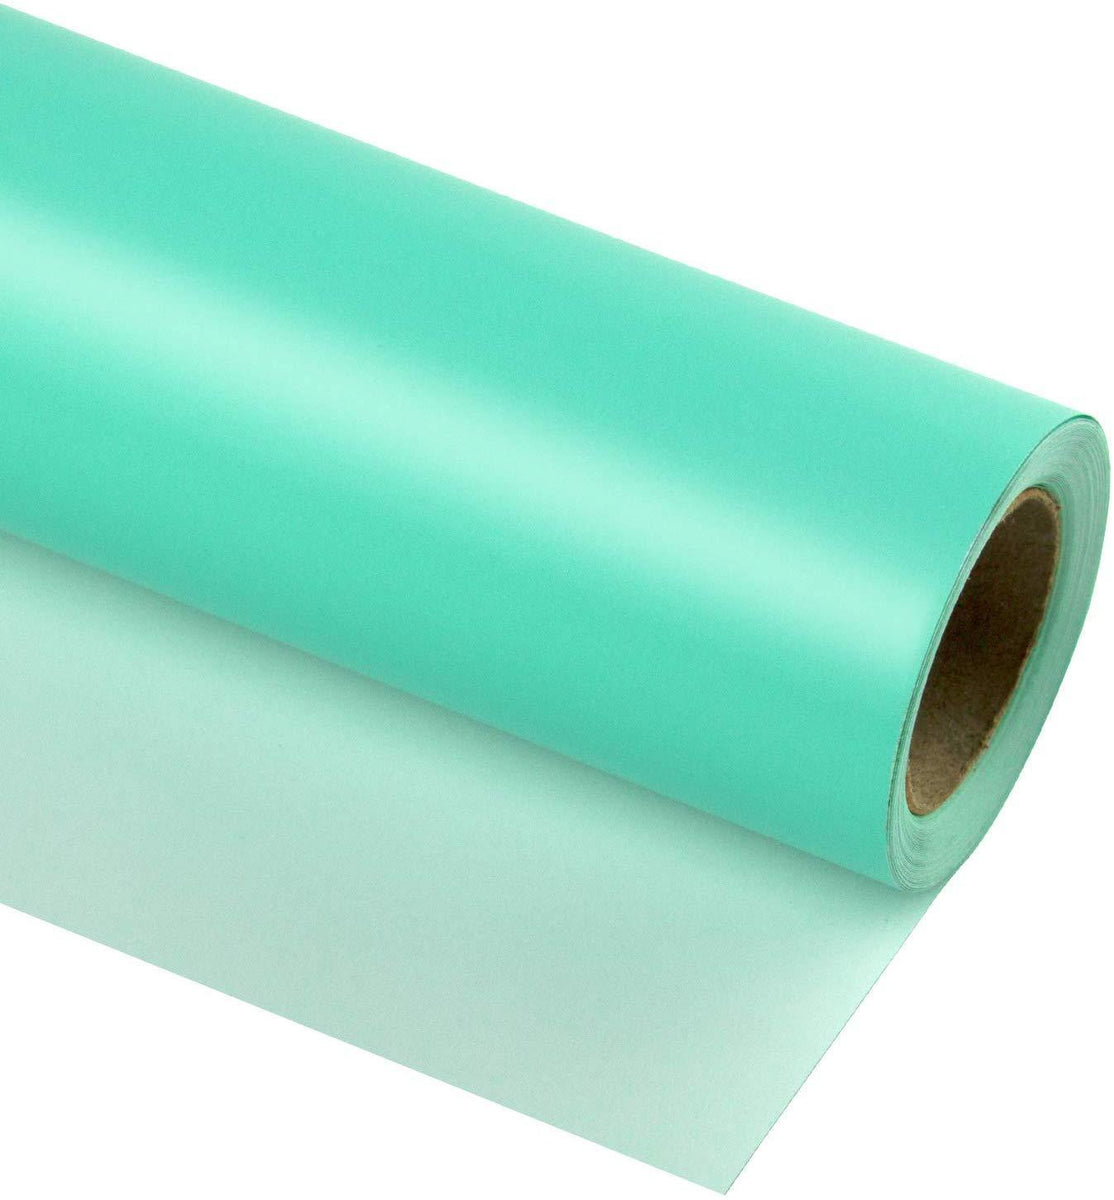 Metallic Wrapping Paper Roll, Green 32.8